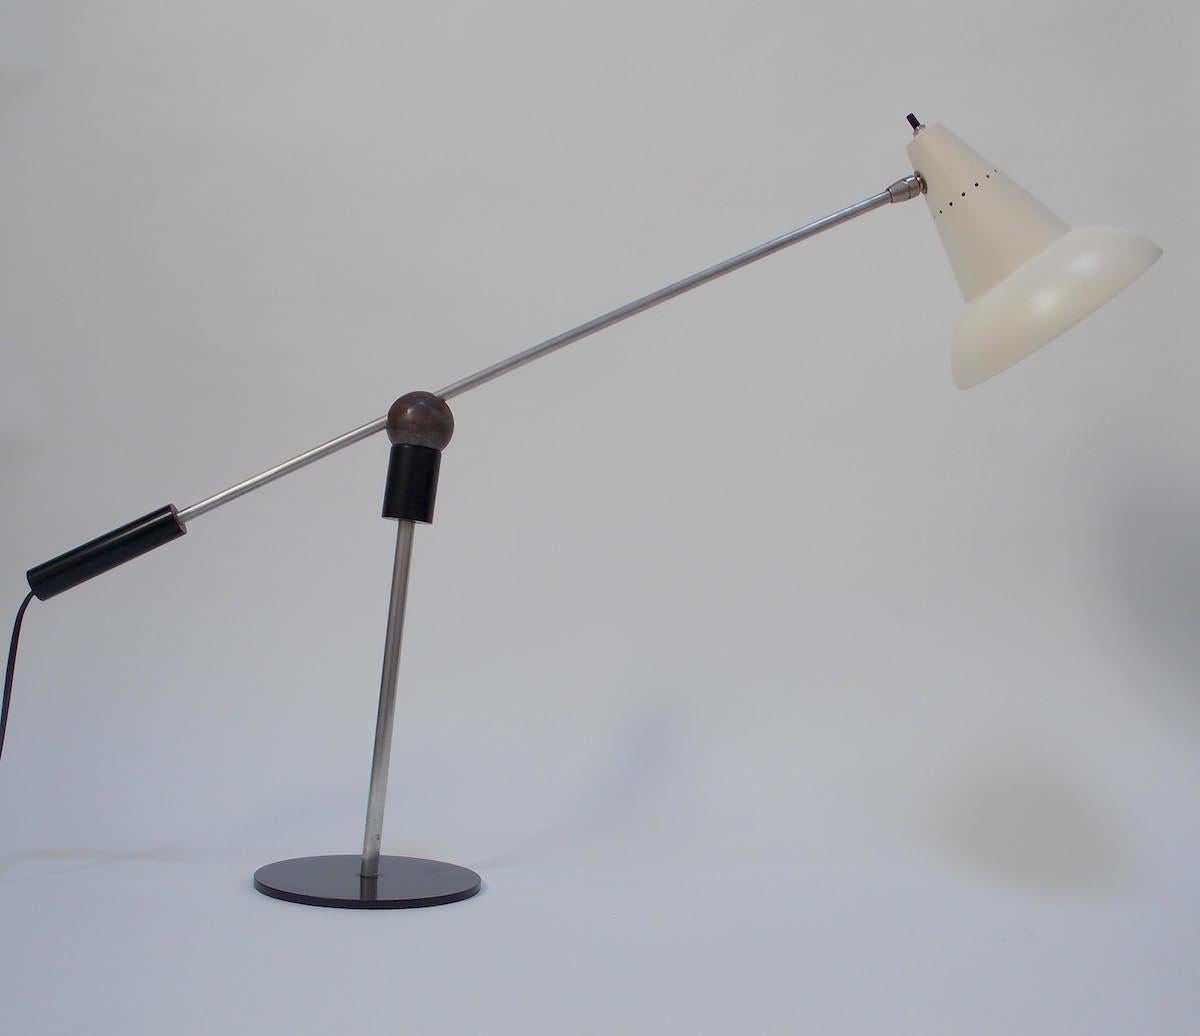 A variation of the classic MOMA low cost lighting example.
Manufactured by Heifetz in the 1950s utilizing a round pivoting magnet.
 